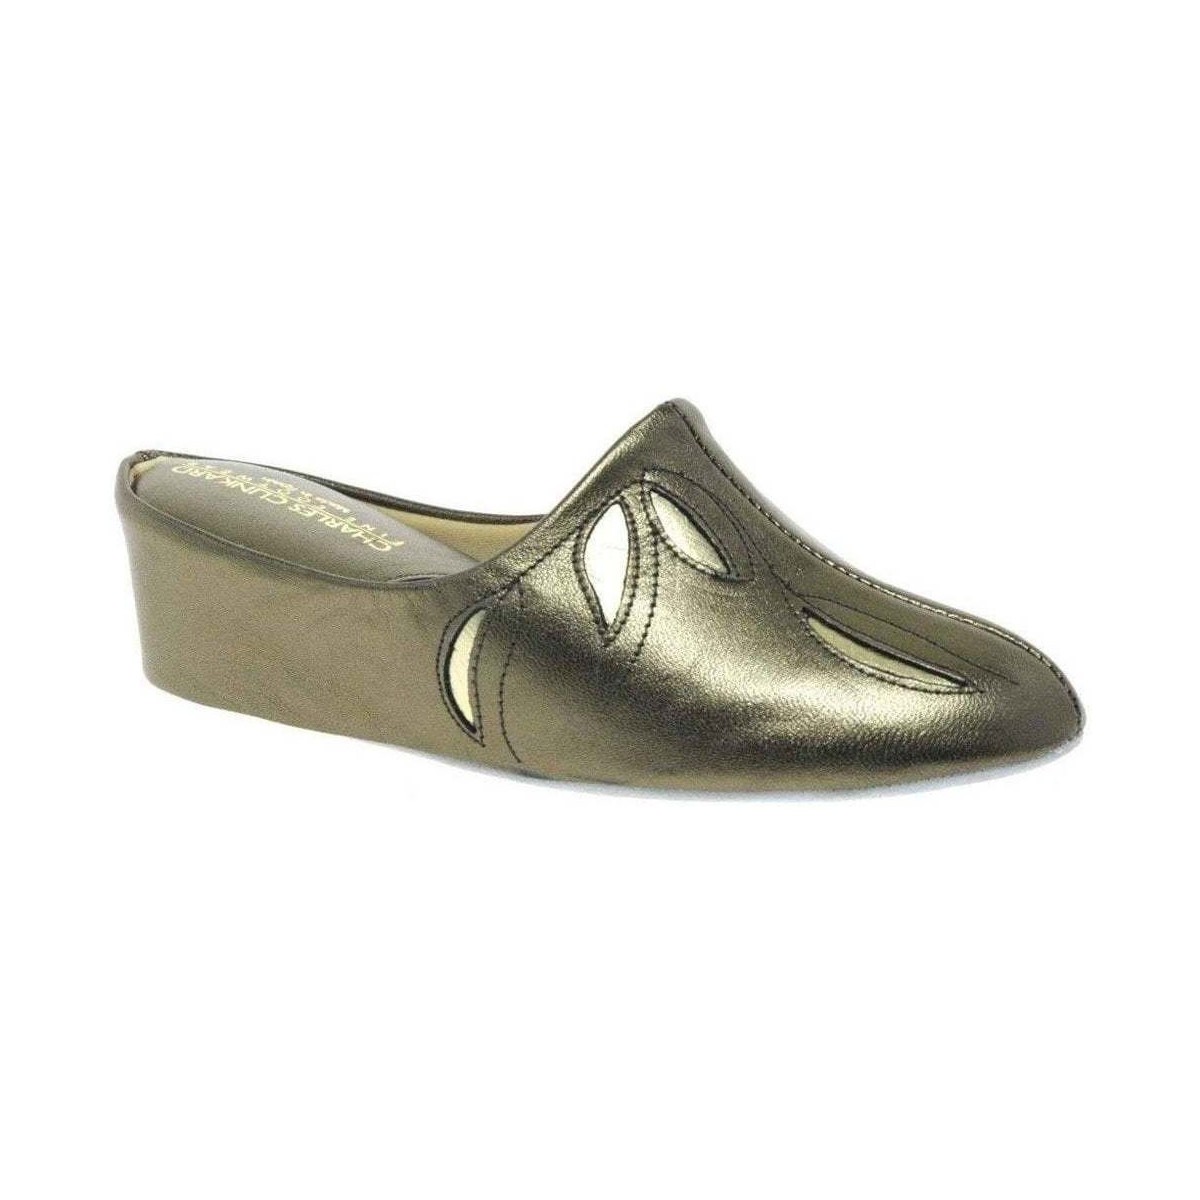 Shoes Women Slippers Relax Slippers Molly Leather Slipper Silver